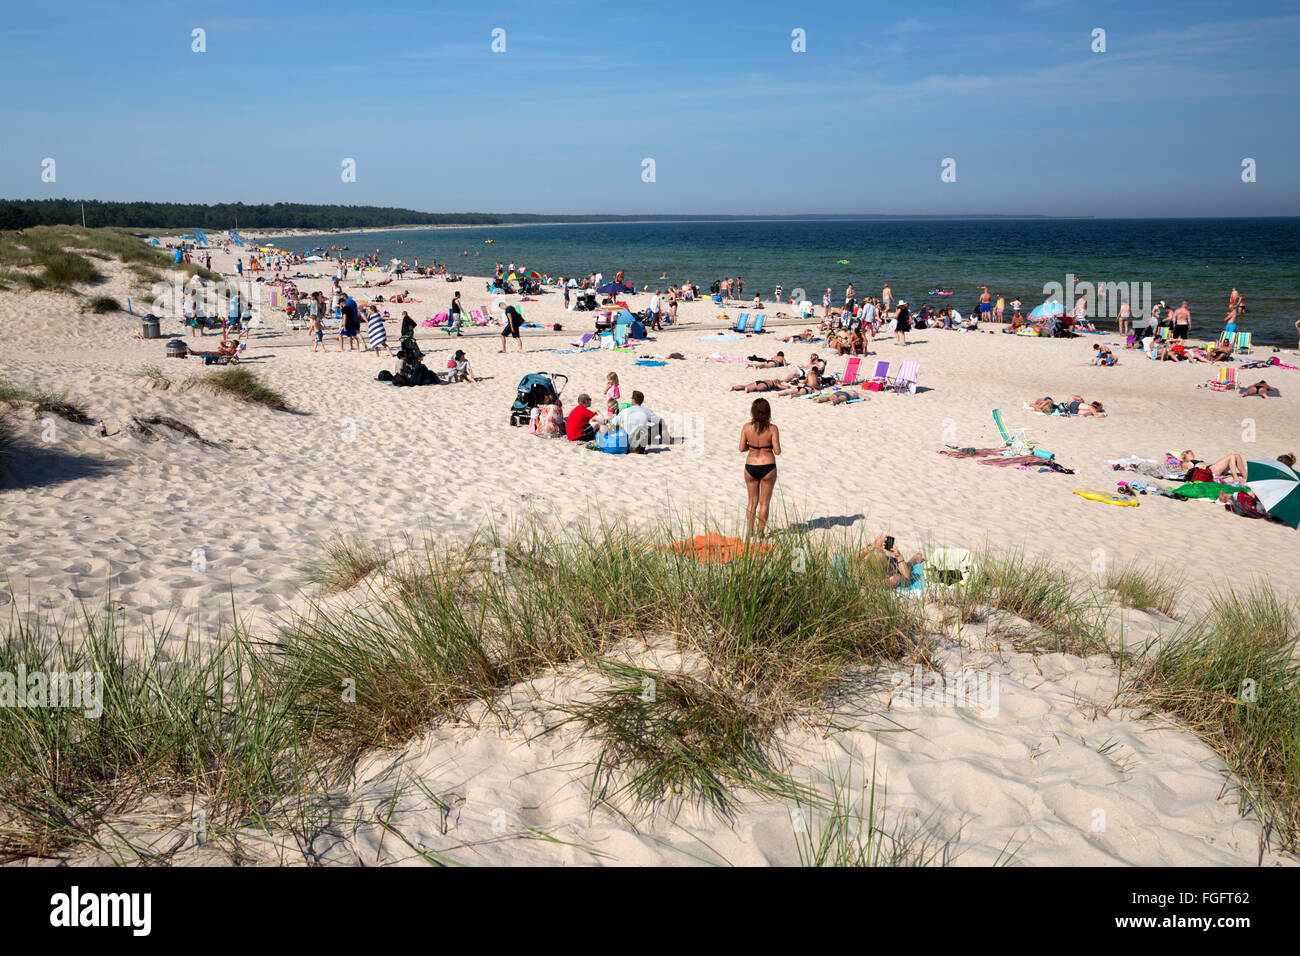 Oland Sweden High Resolution Stock Photography And Images Alamy